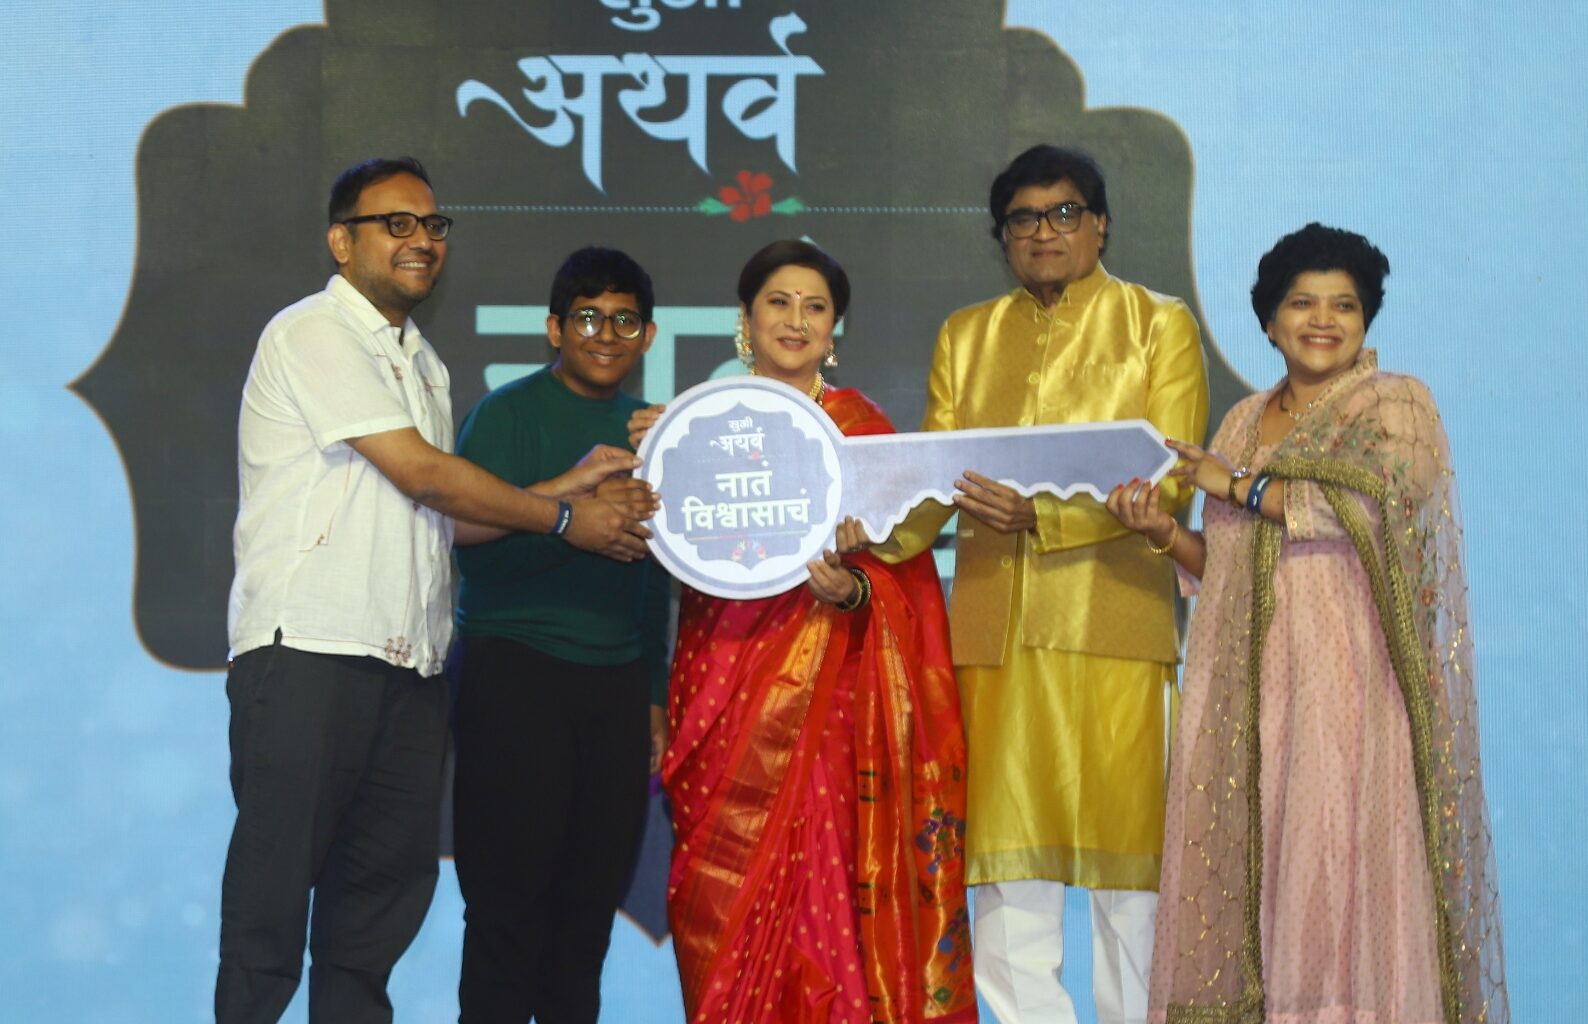 Sugee Group Marks Successful Completion of homes promised before its scheduled time to 160+ Families at ‘Sugee Atharva’